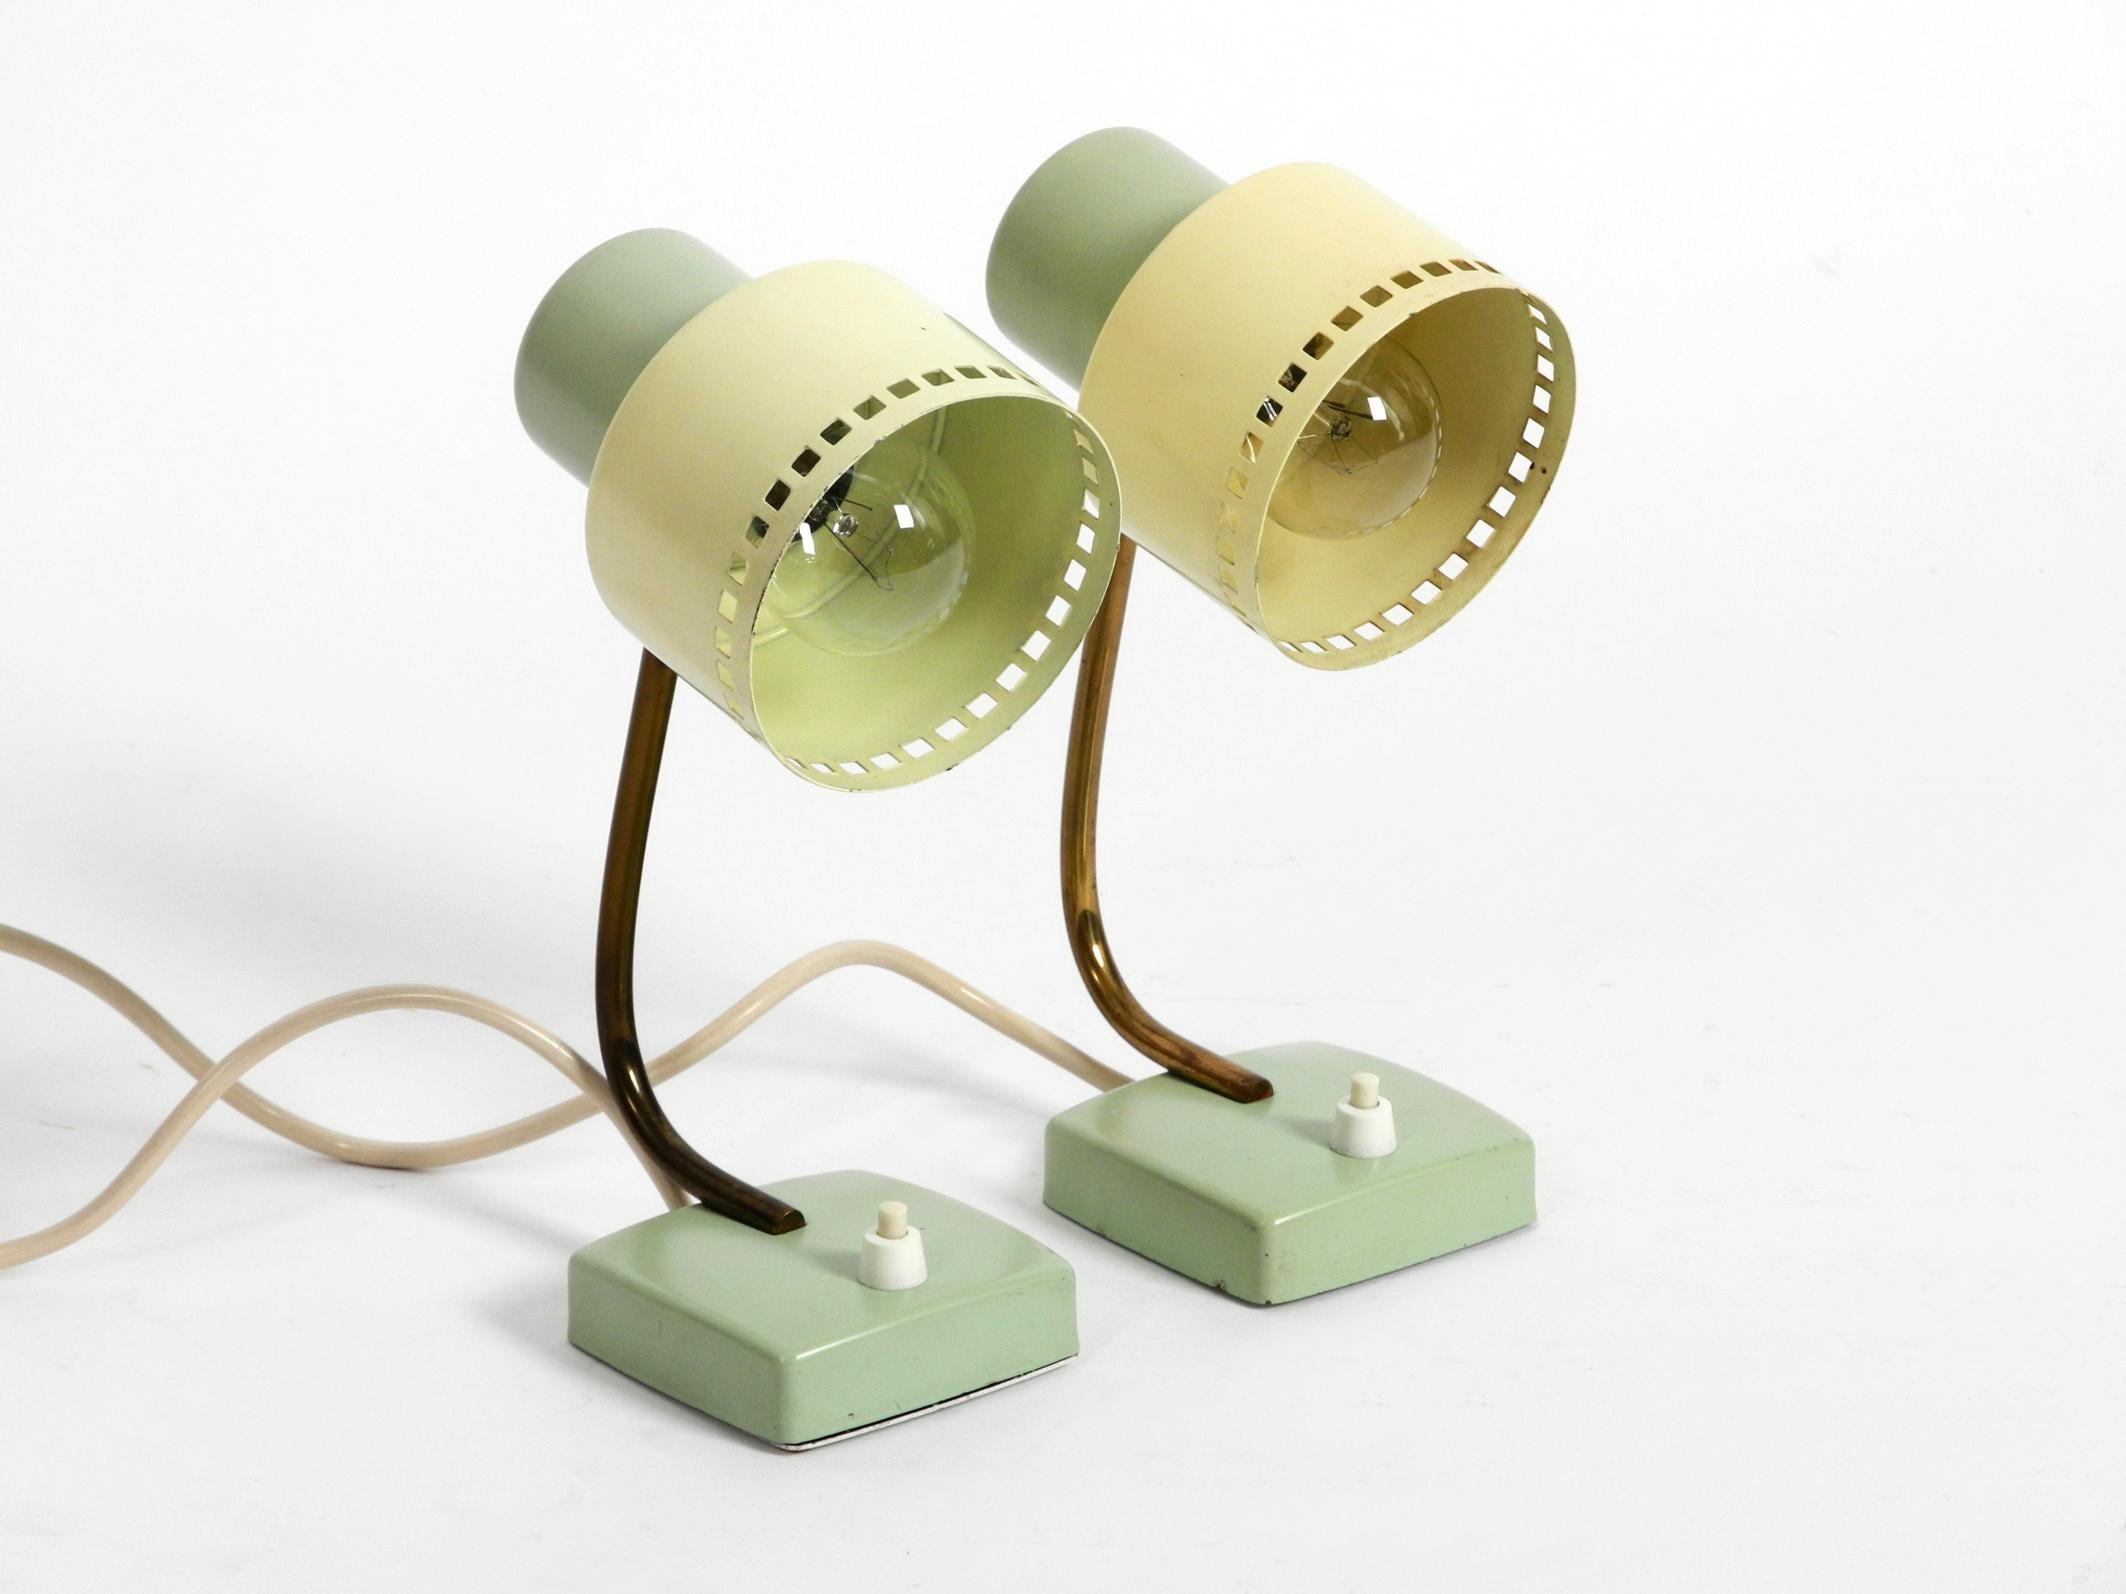 Two beautiful midcentury metal night or desk lamps.
Fantastic in this combination of mint green and yellow.
Typical design from that time, in very good vintage condition.
Shades can be adjusted continuously in height.
Shades and feet are made of